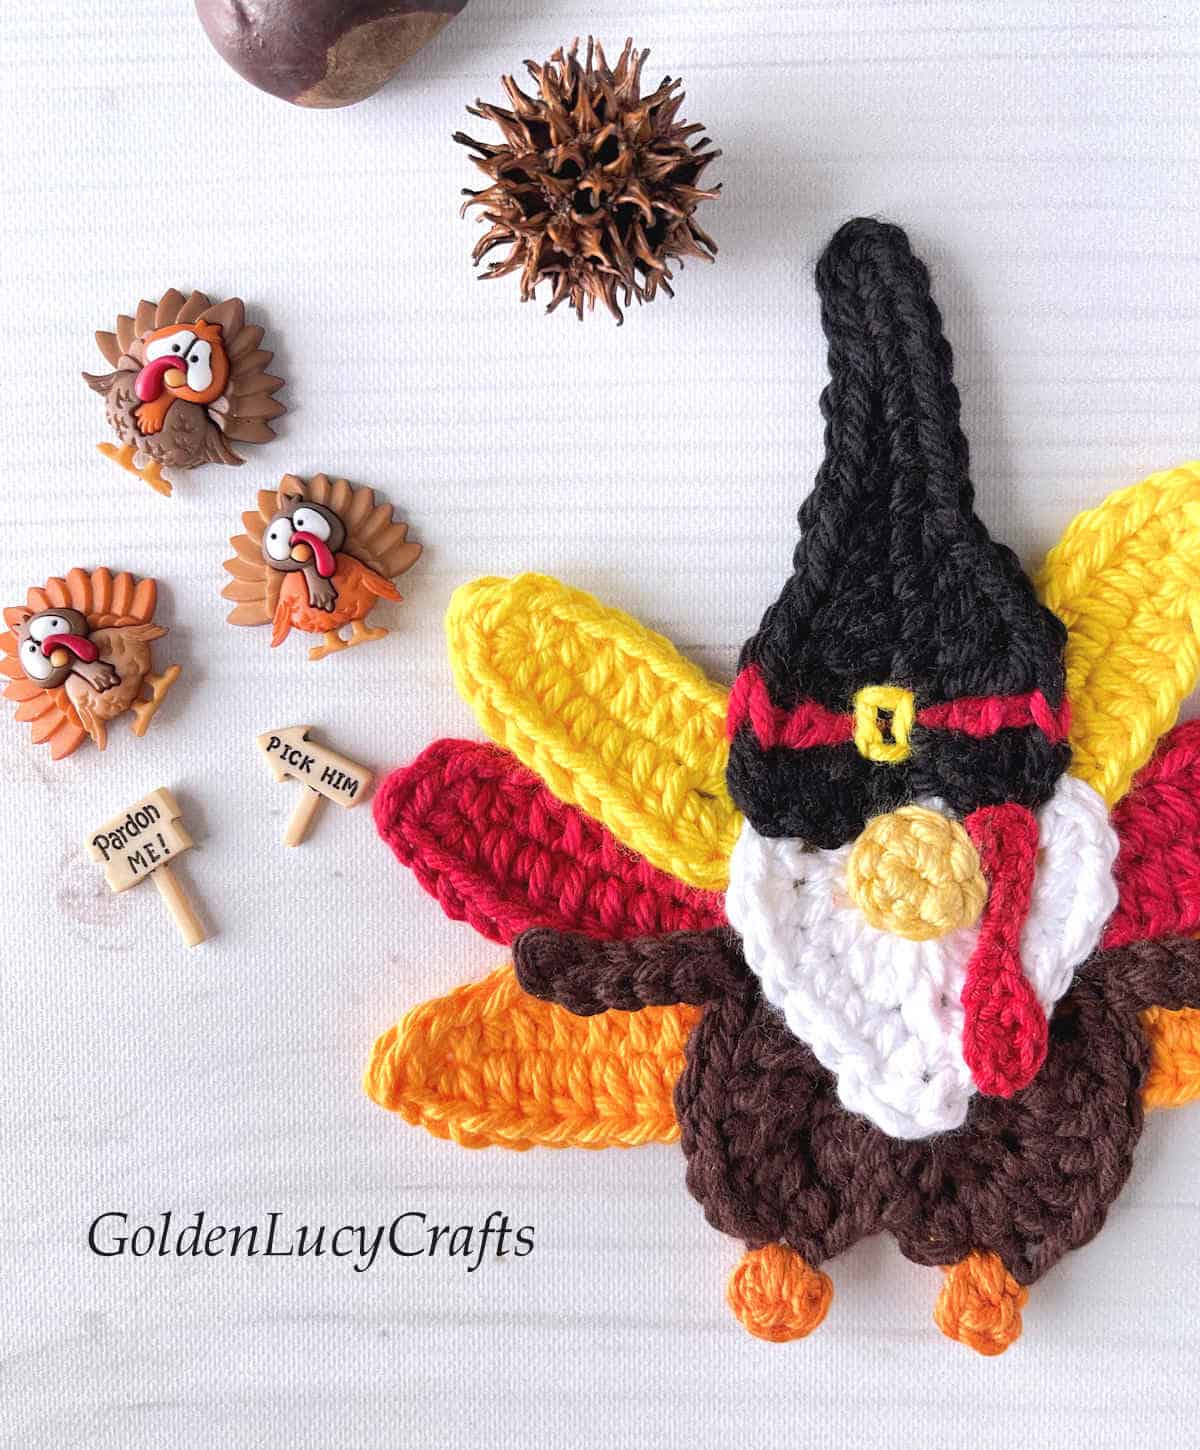 Crochet turkey gnome and decorative buttons - close up picture.